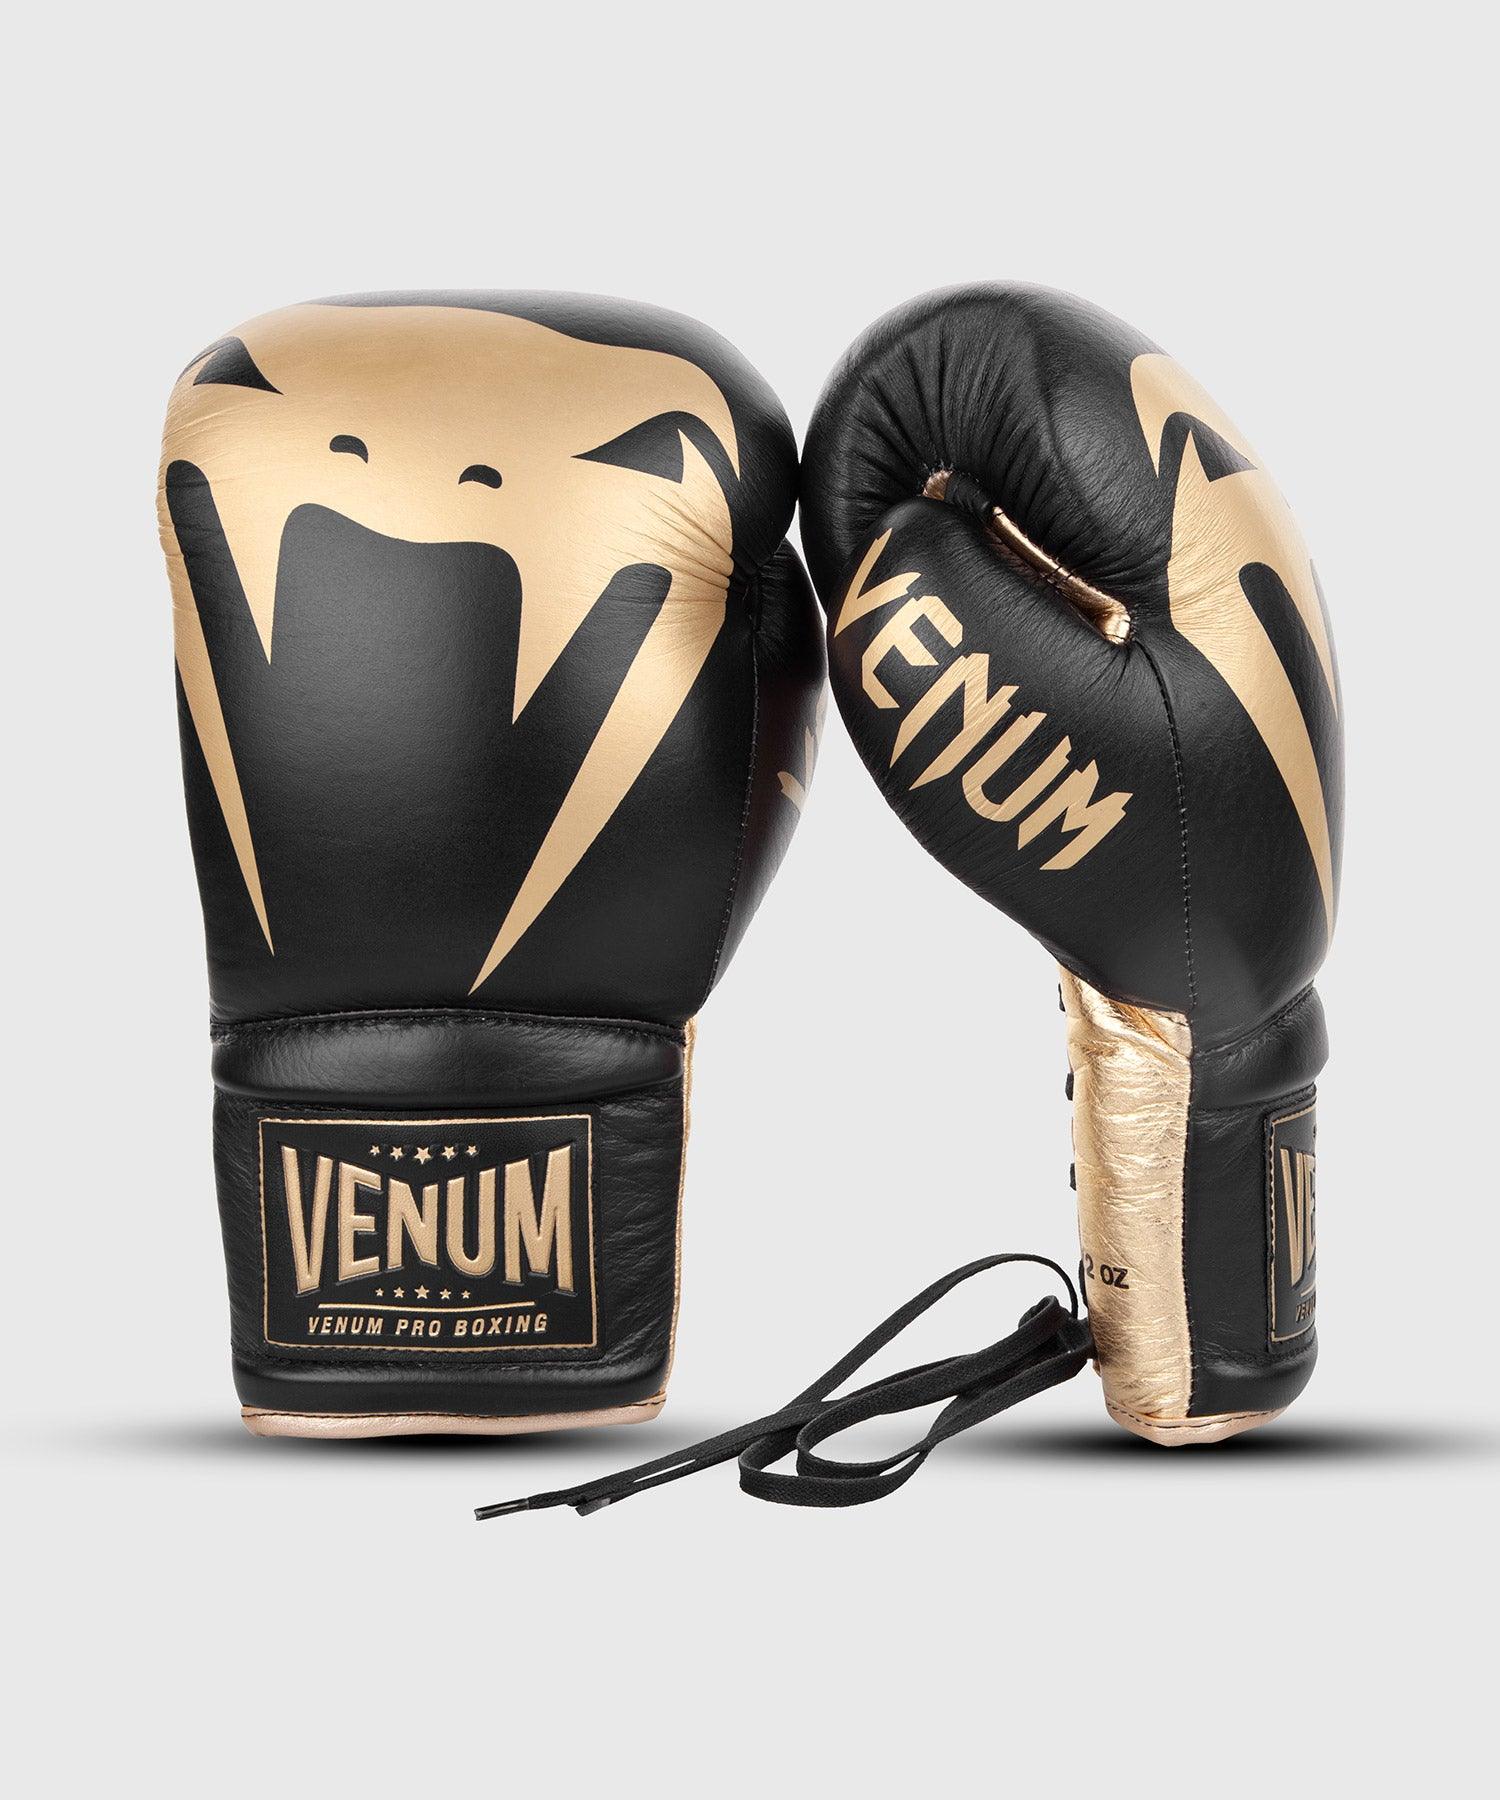 Venum Giant 2.0 Pro Boxing Gloves - With Laces - Black/Gold Picture 2